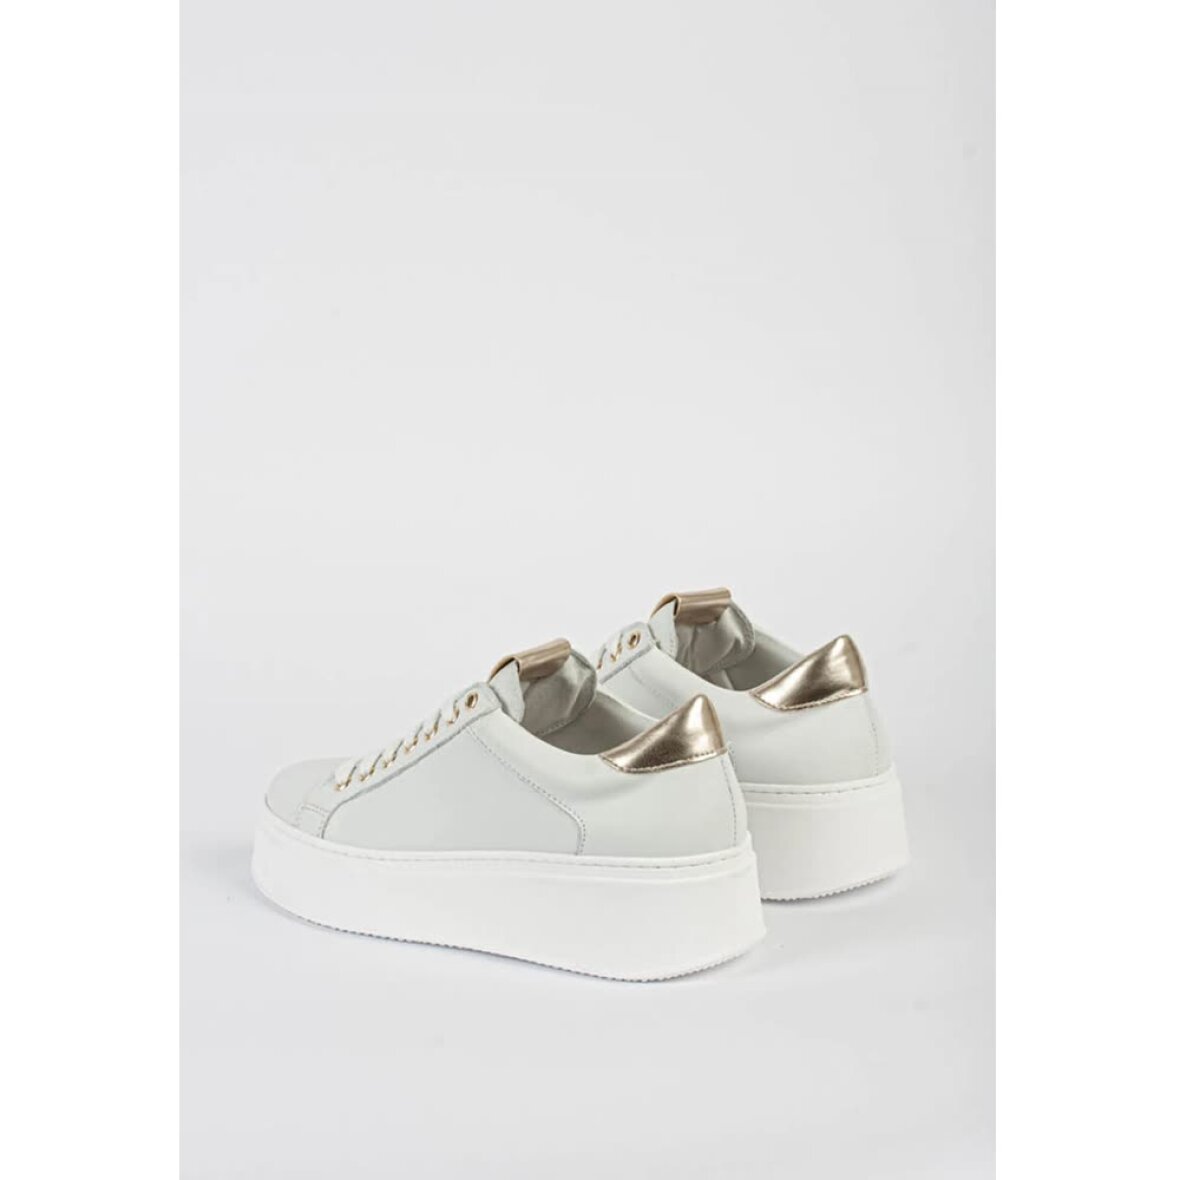 Bukela Coco Sneakers / white with gold